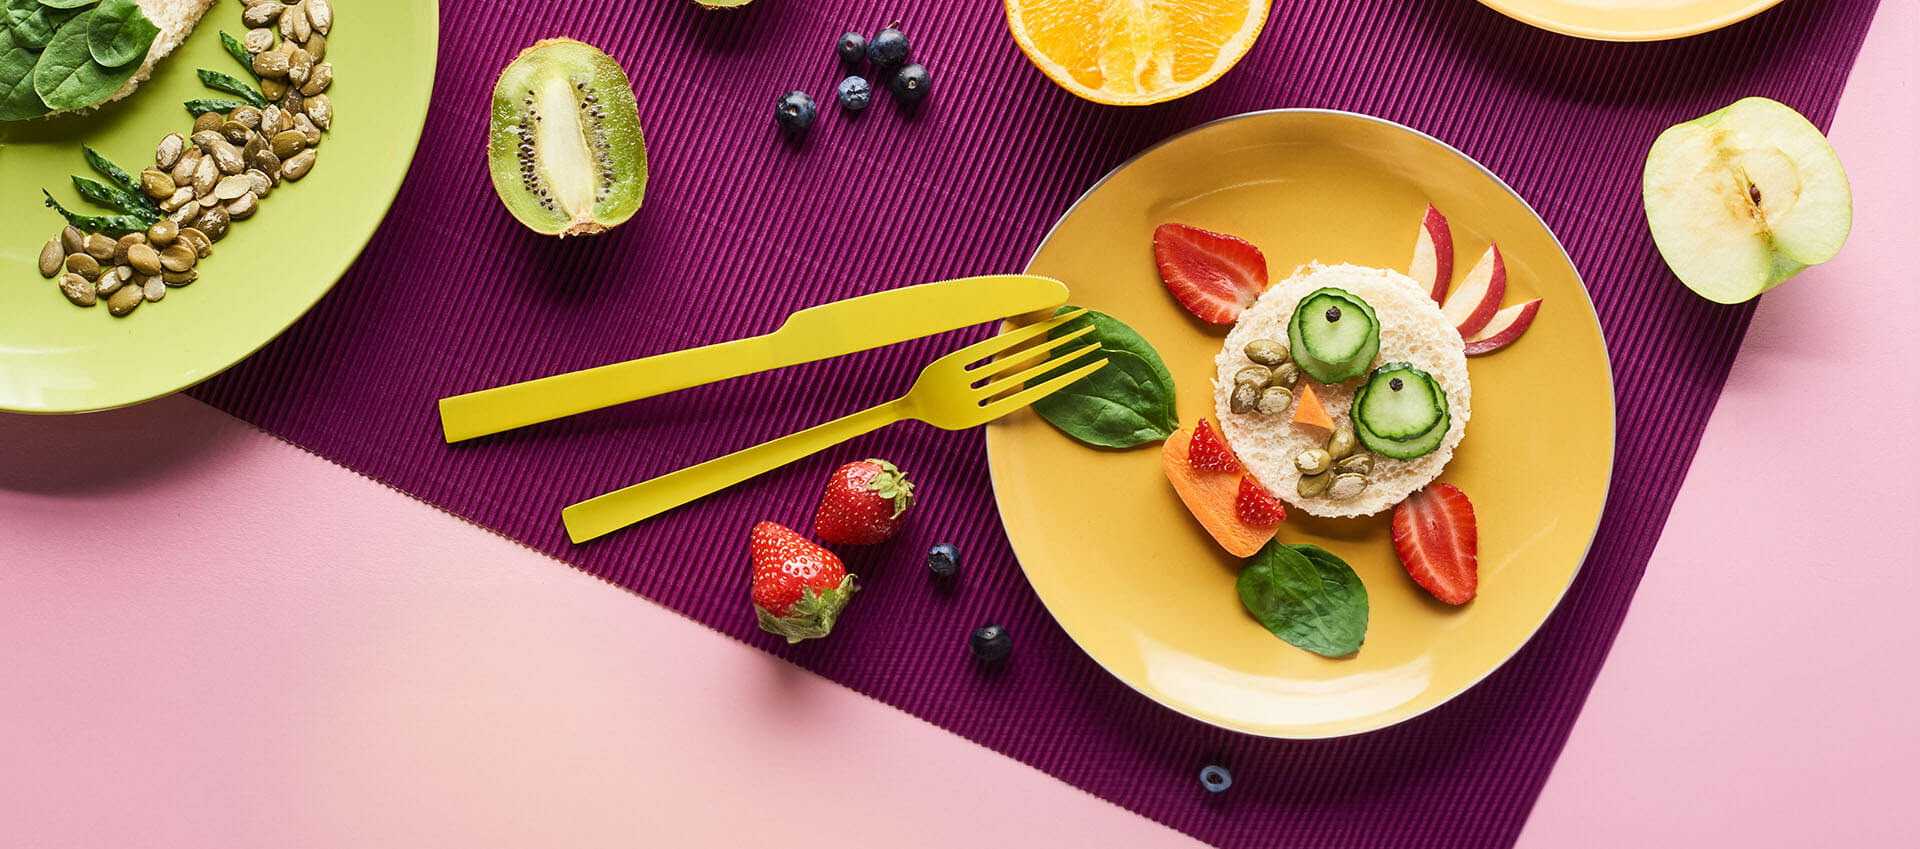 Colorful table setting with amuzing bread and fruit arrangement that looks like a chicken.